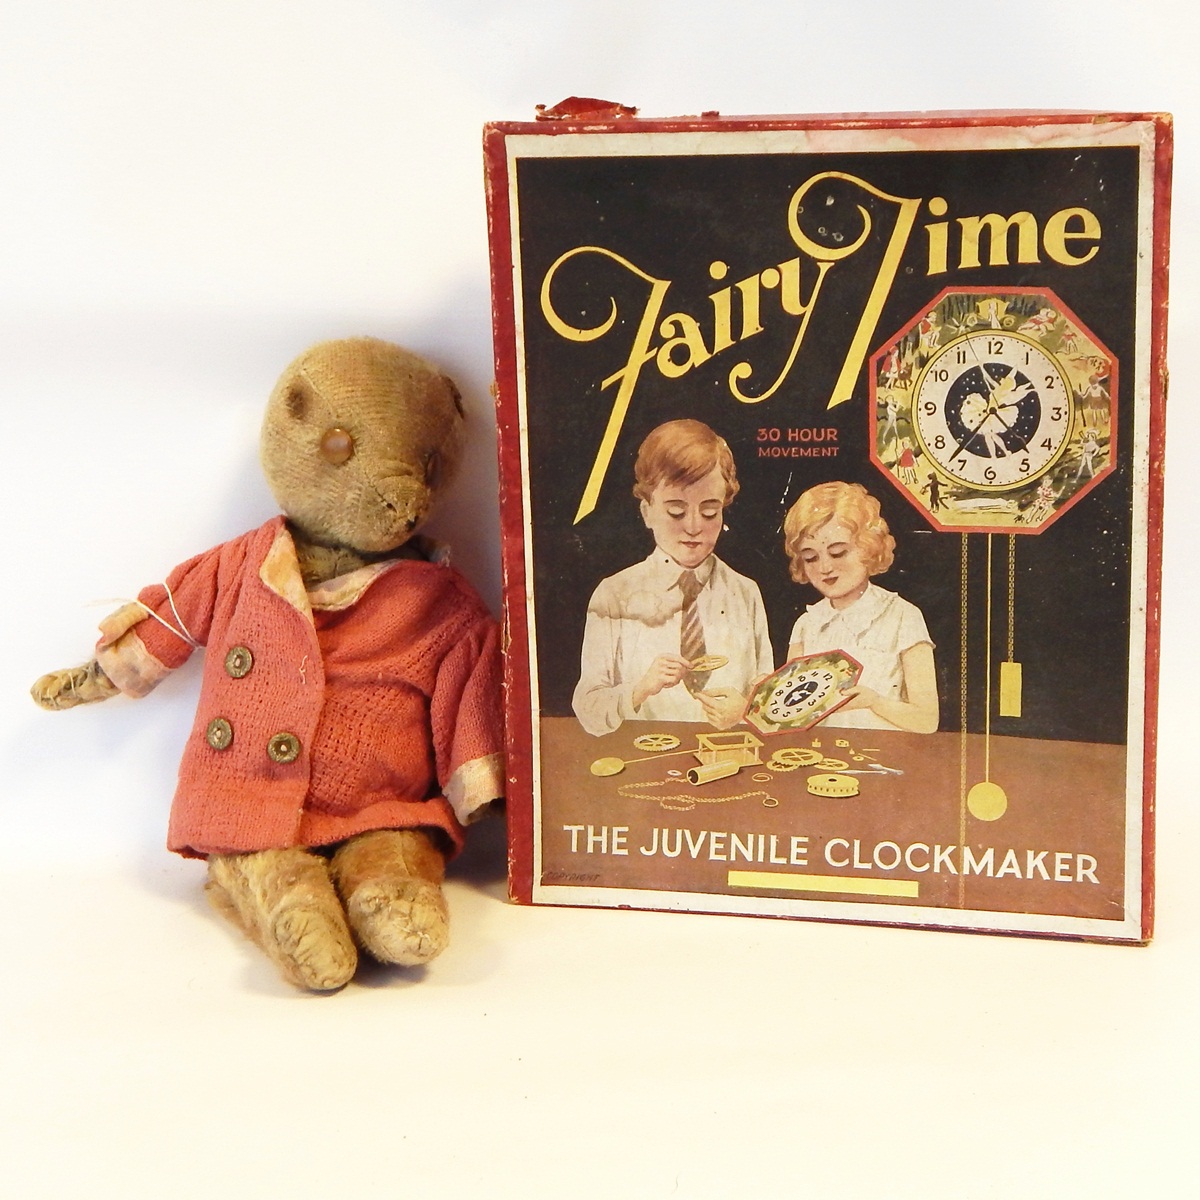 Old small plush bodied teddy bear, 26cm and a home made clock set,